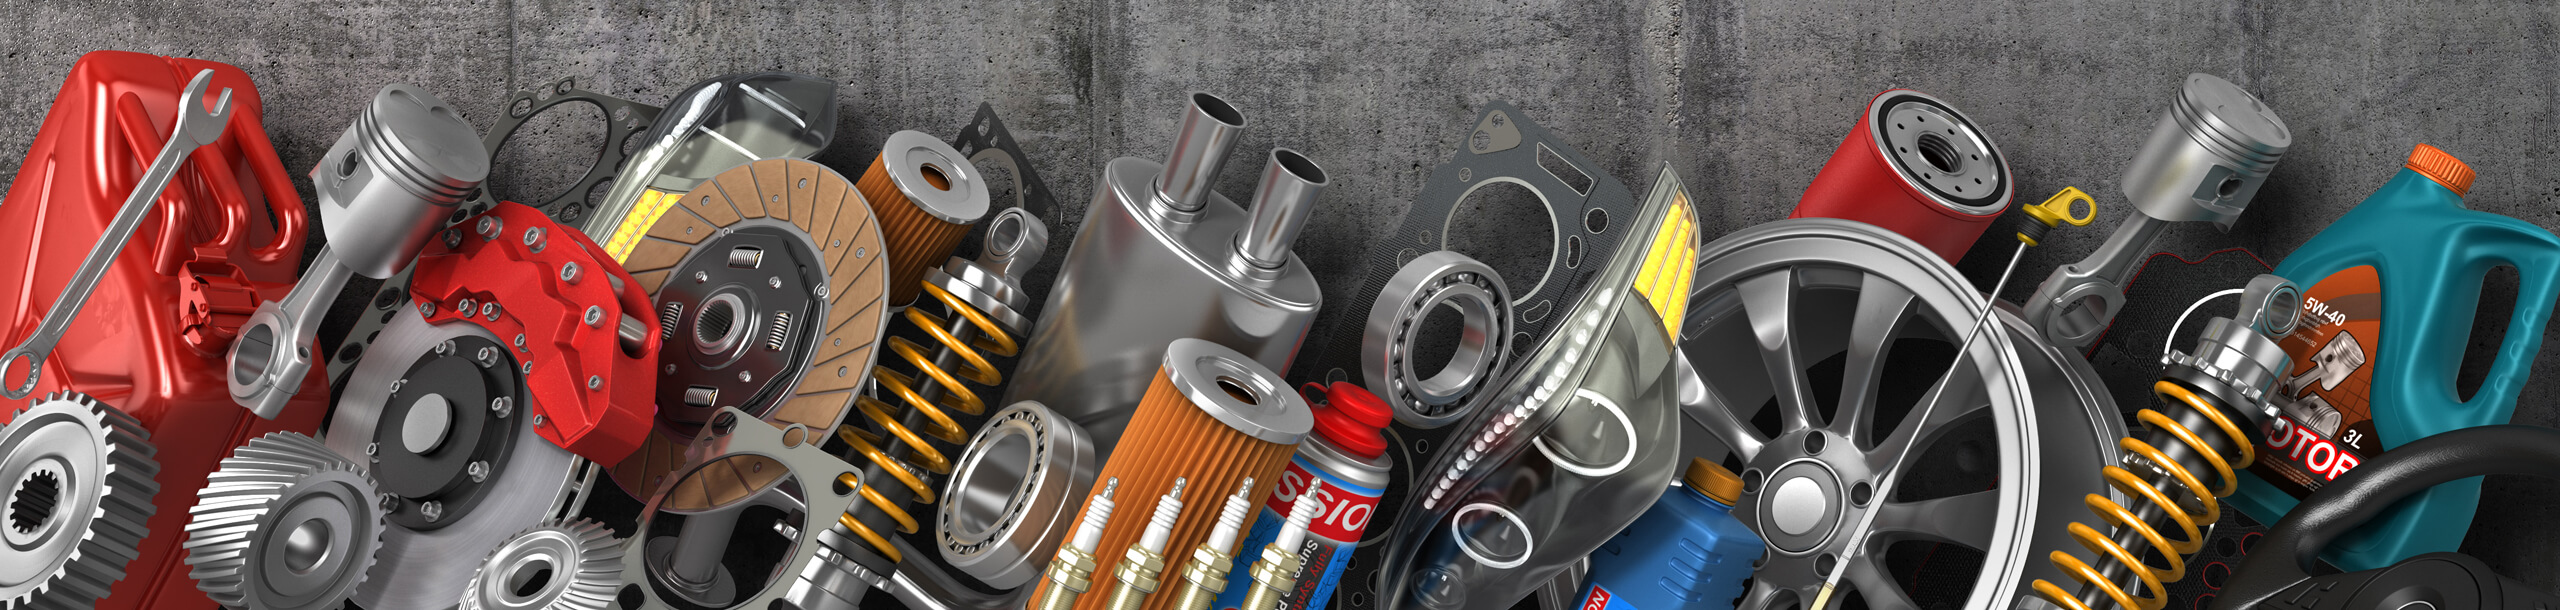 The Top 2 Ways To Organize An Auto Parts eCommerce Site